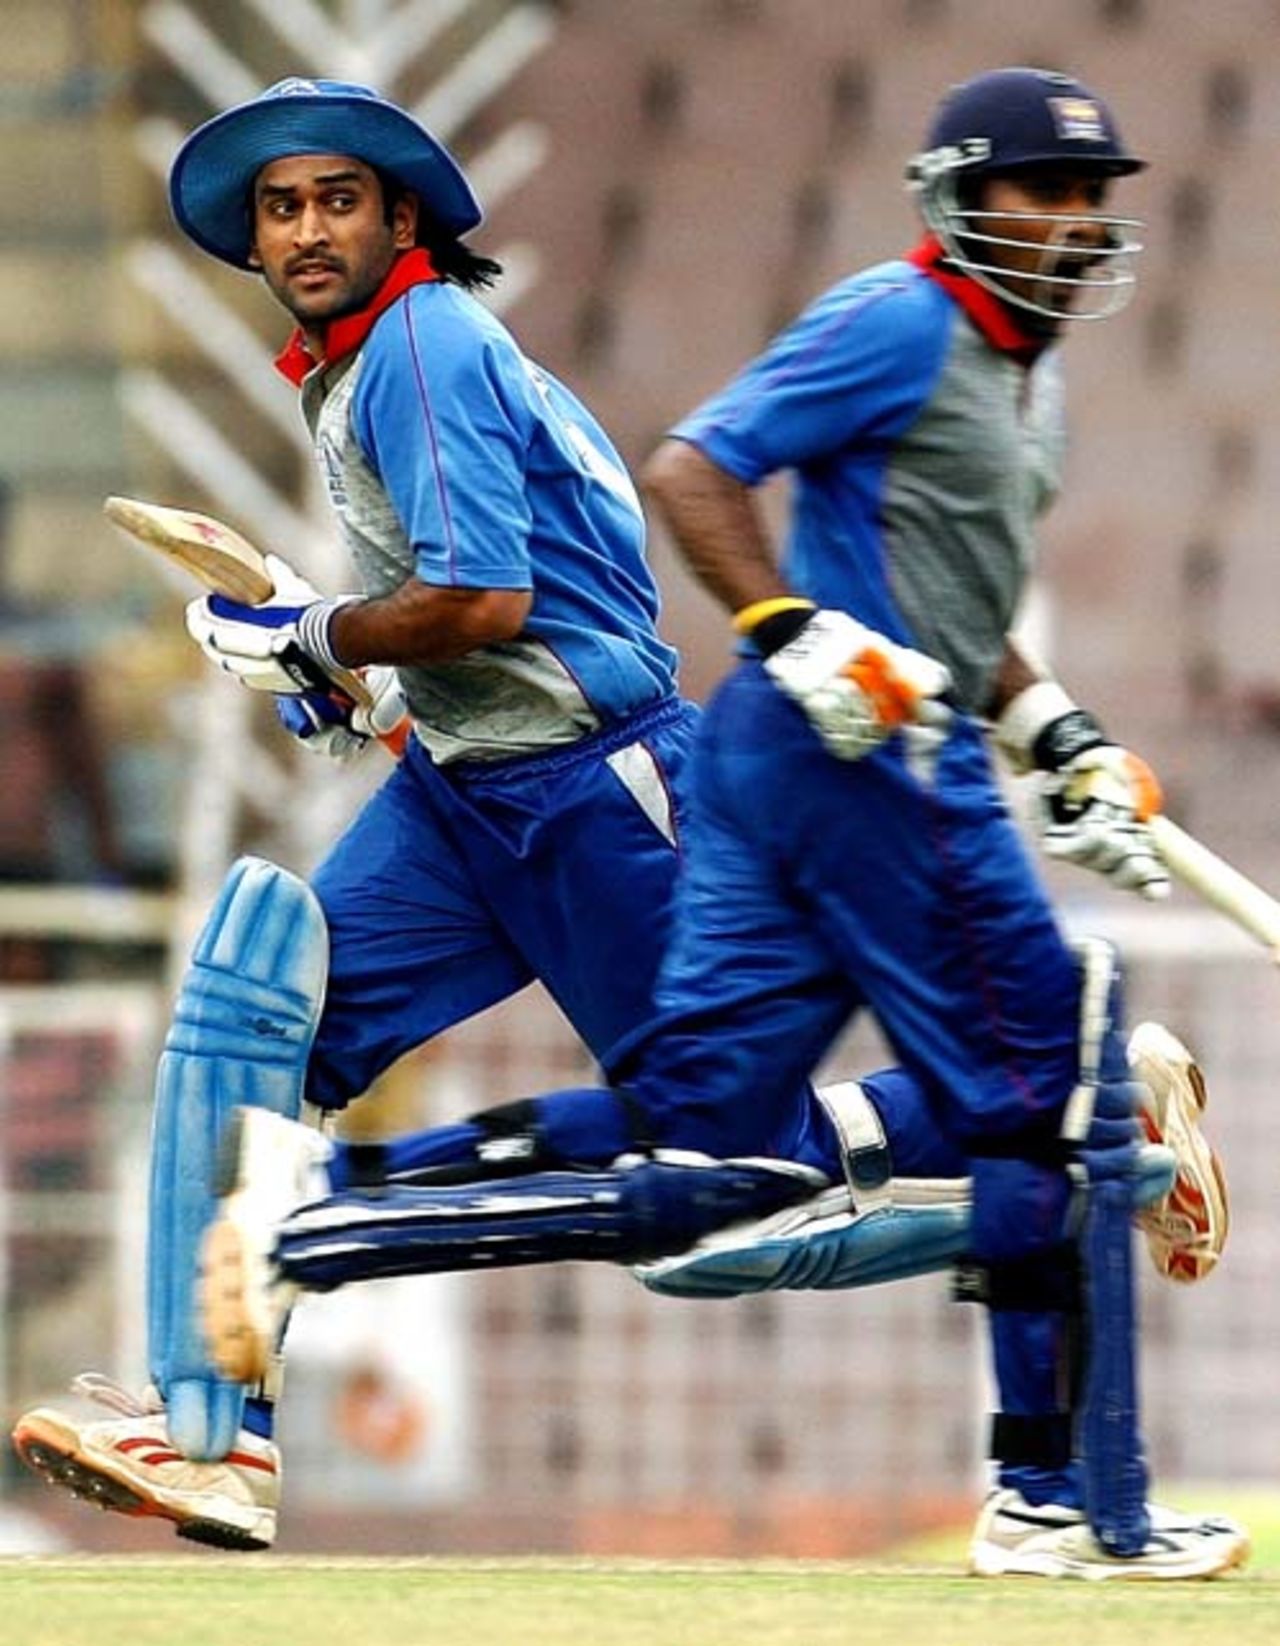 MS Dhoni and Mahela Jayawardene take a single during their double century stand in a century stand in the third ODI of the Afro-Asia cup at Chennai, June 10, 2007